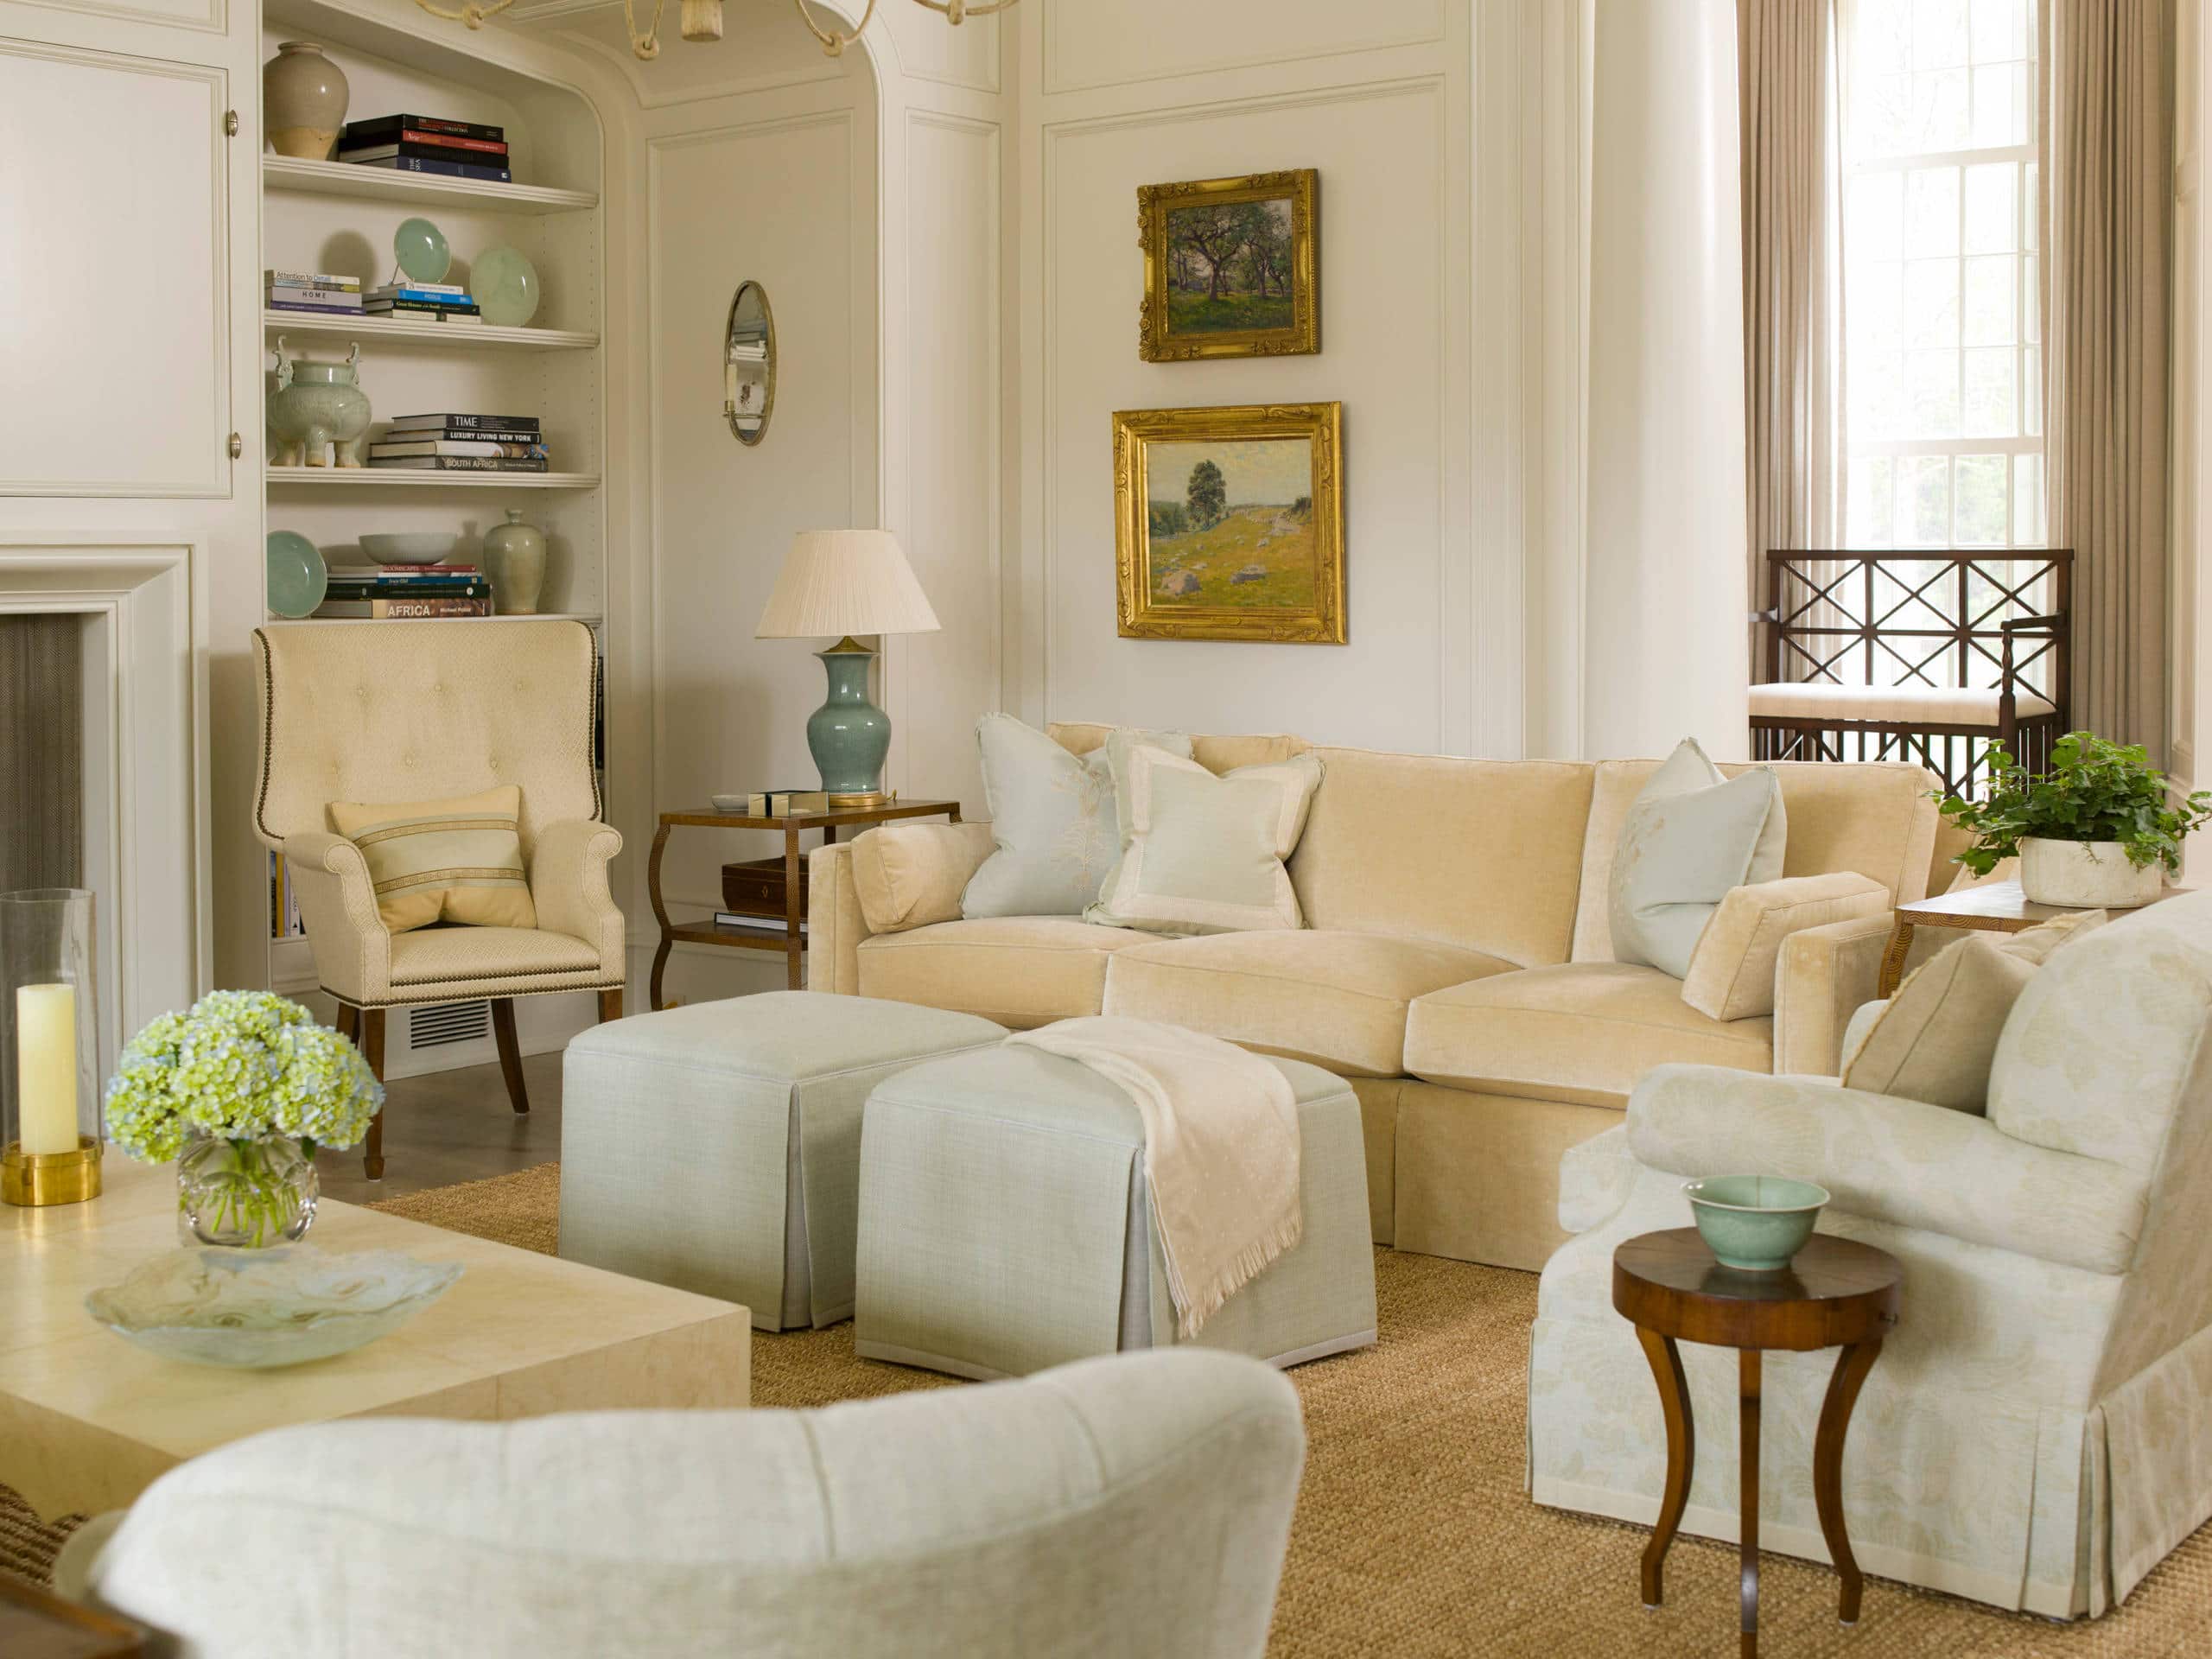 Charlotte house home tour featuring a elegant living room with light blue armchairs anc sofas